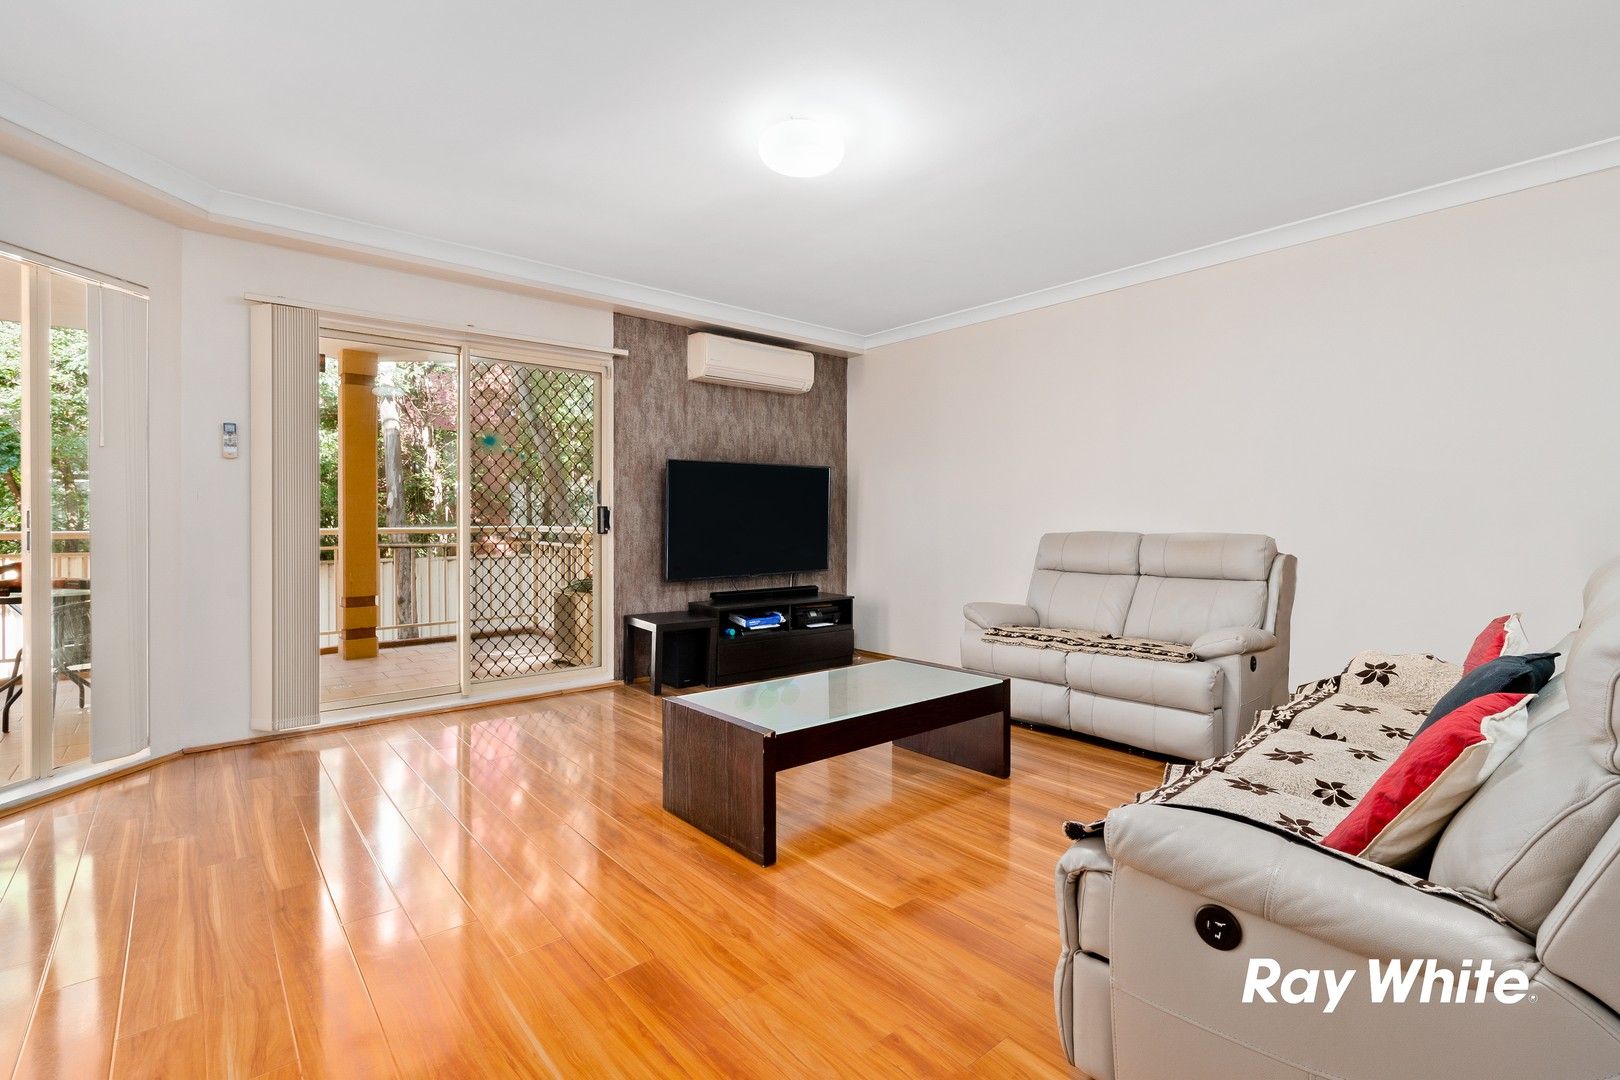 3 bedrooms Apartment / Unit / Flat in 8/24 Fourth Avenue BLACKTOWN NSW, 2148